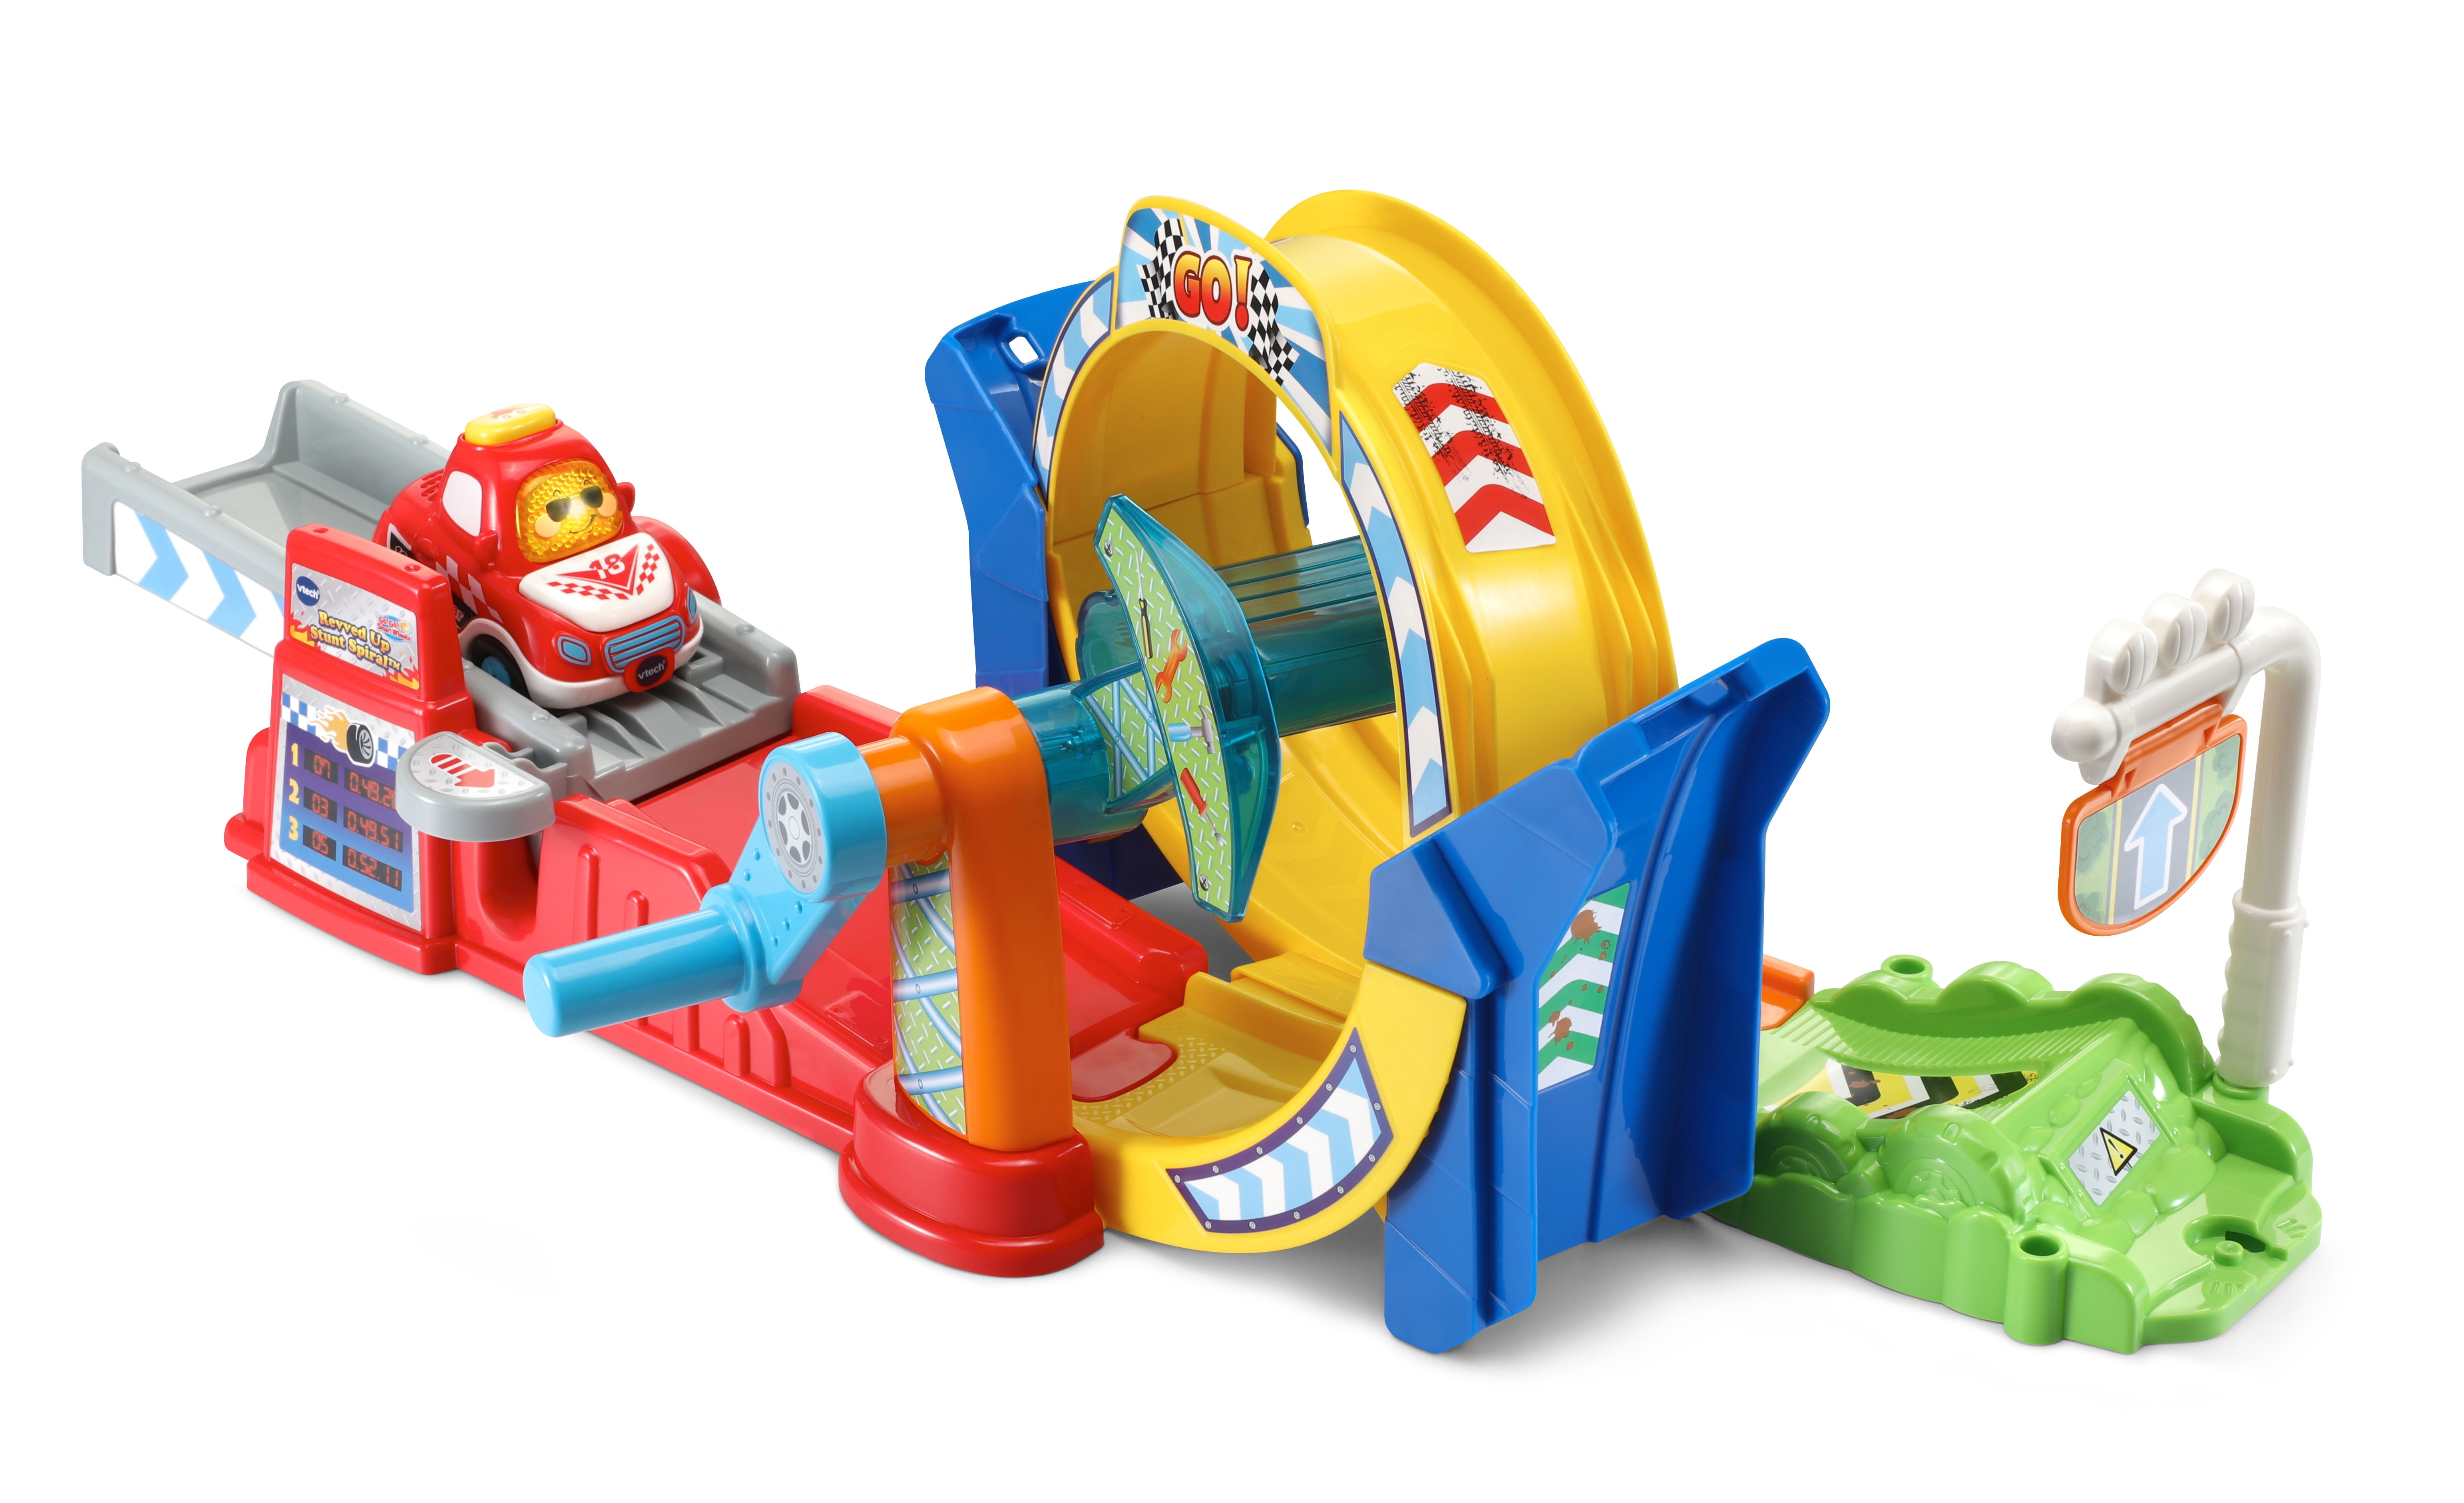 Vtech Toot-Toot Drivers 360 ° Loop Track 80-534903 